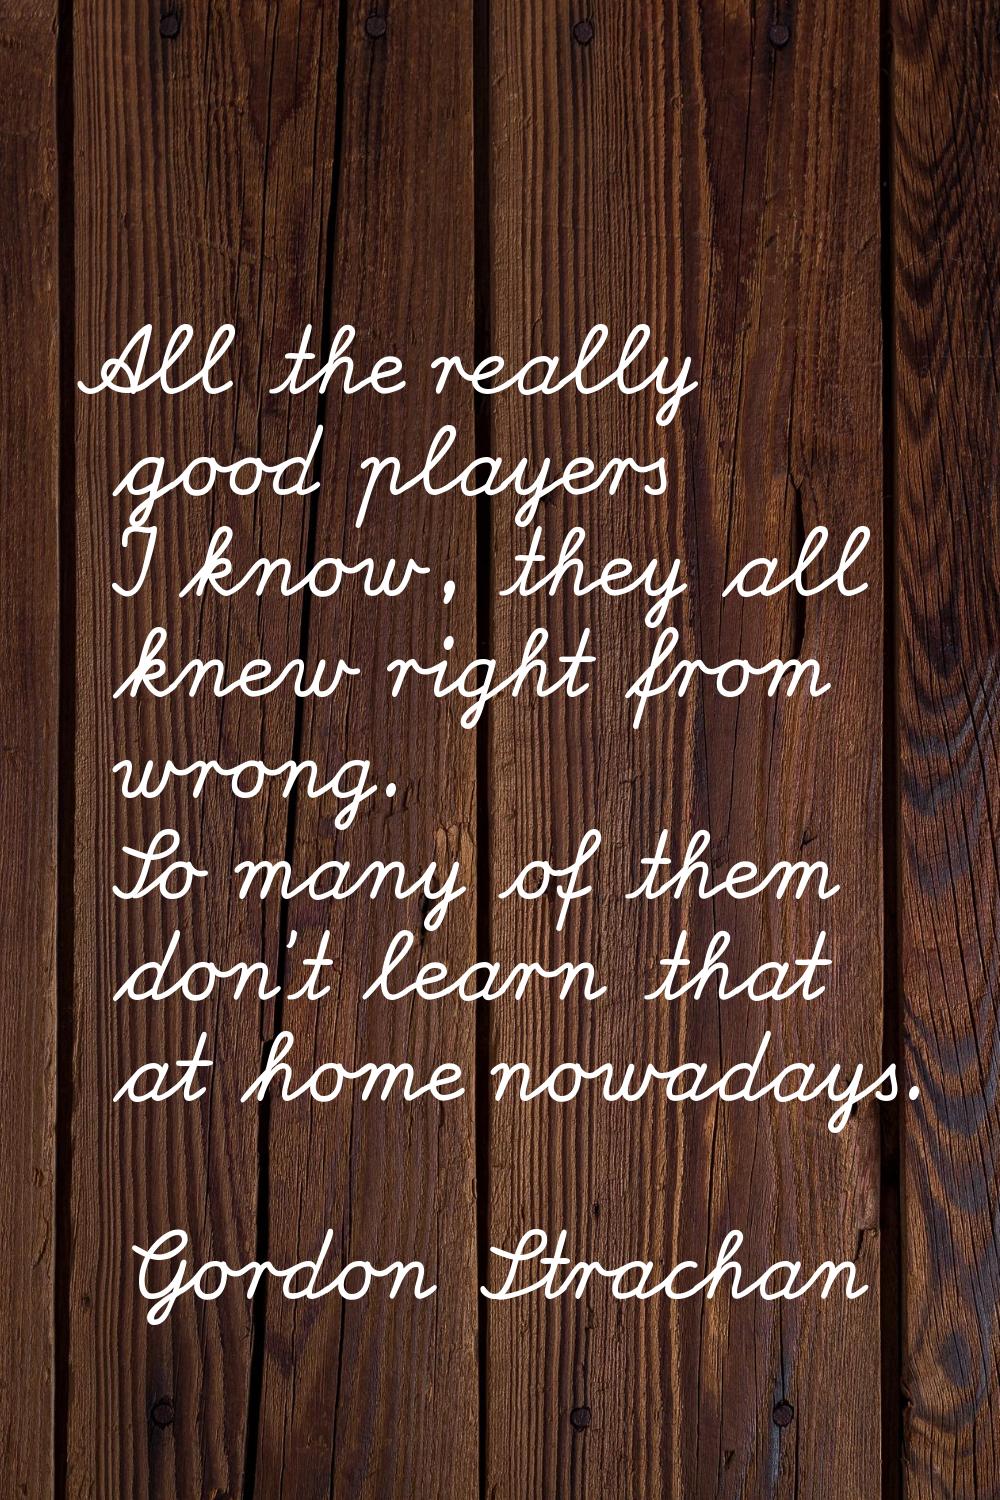 All the really good players I know, they all knew right from wrong. So many of them don't learn tha